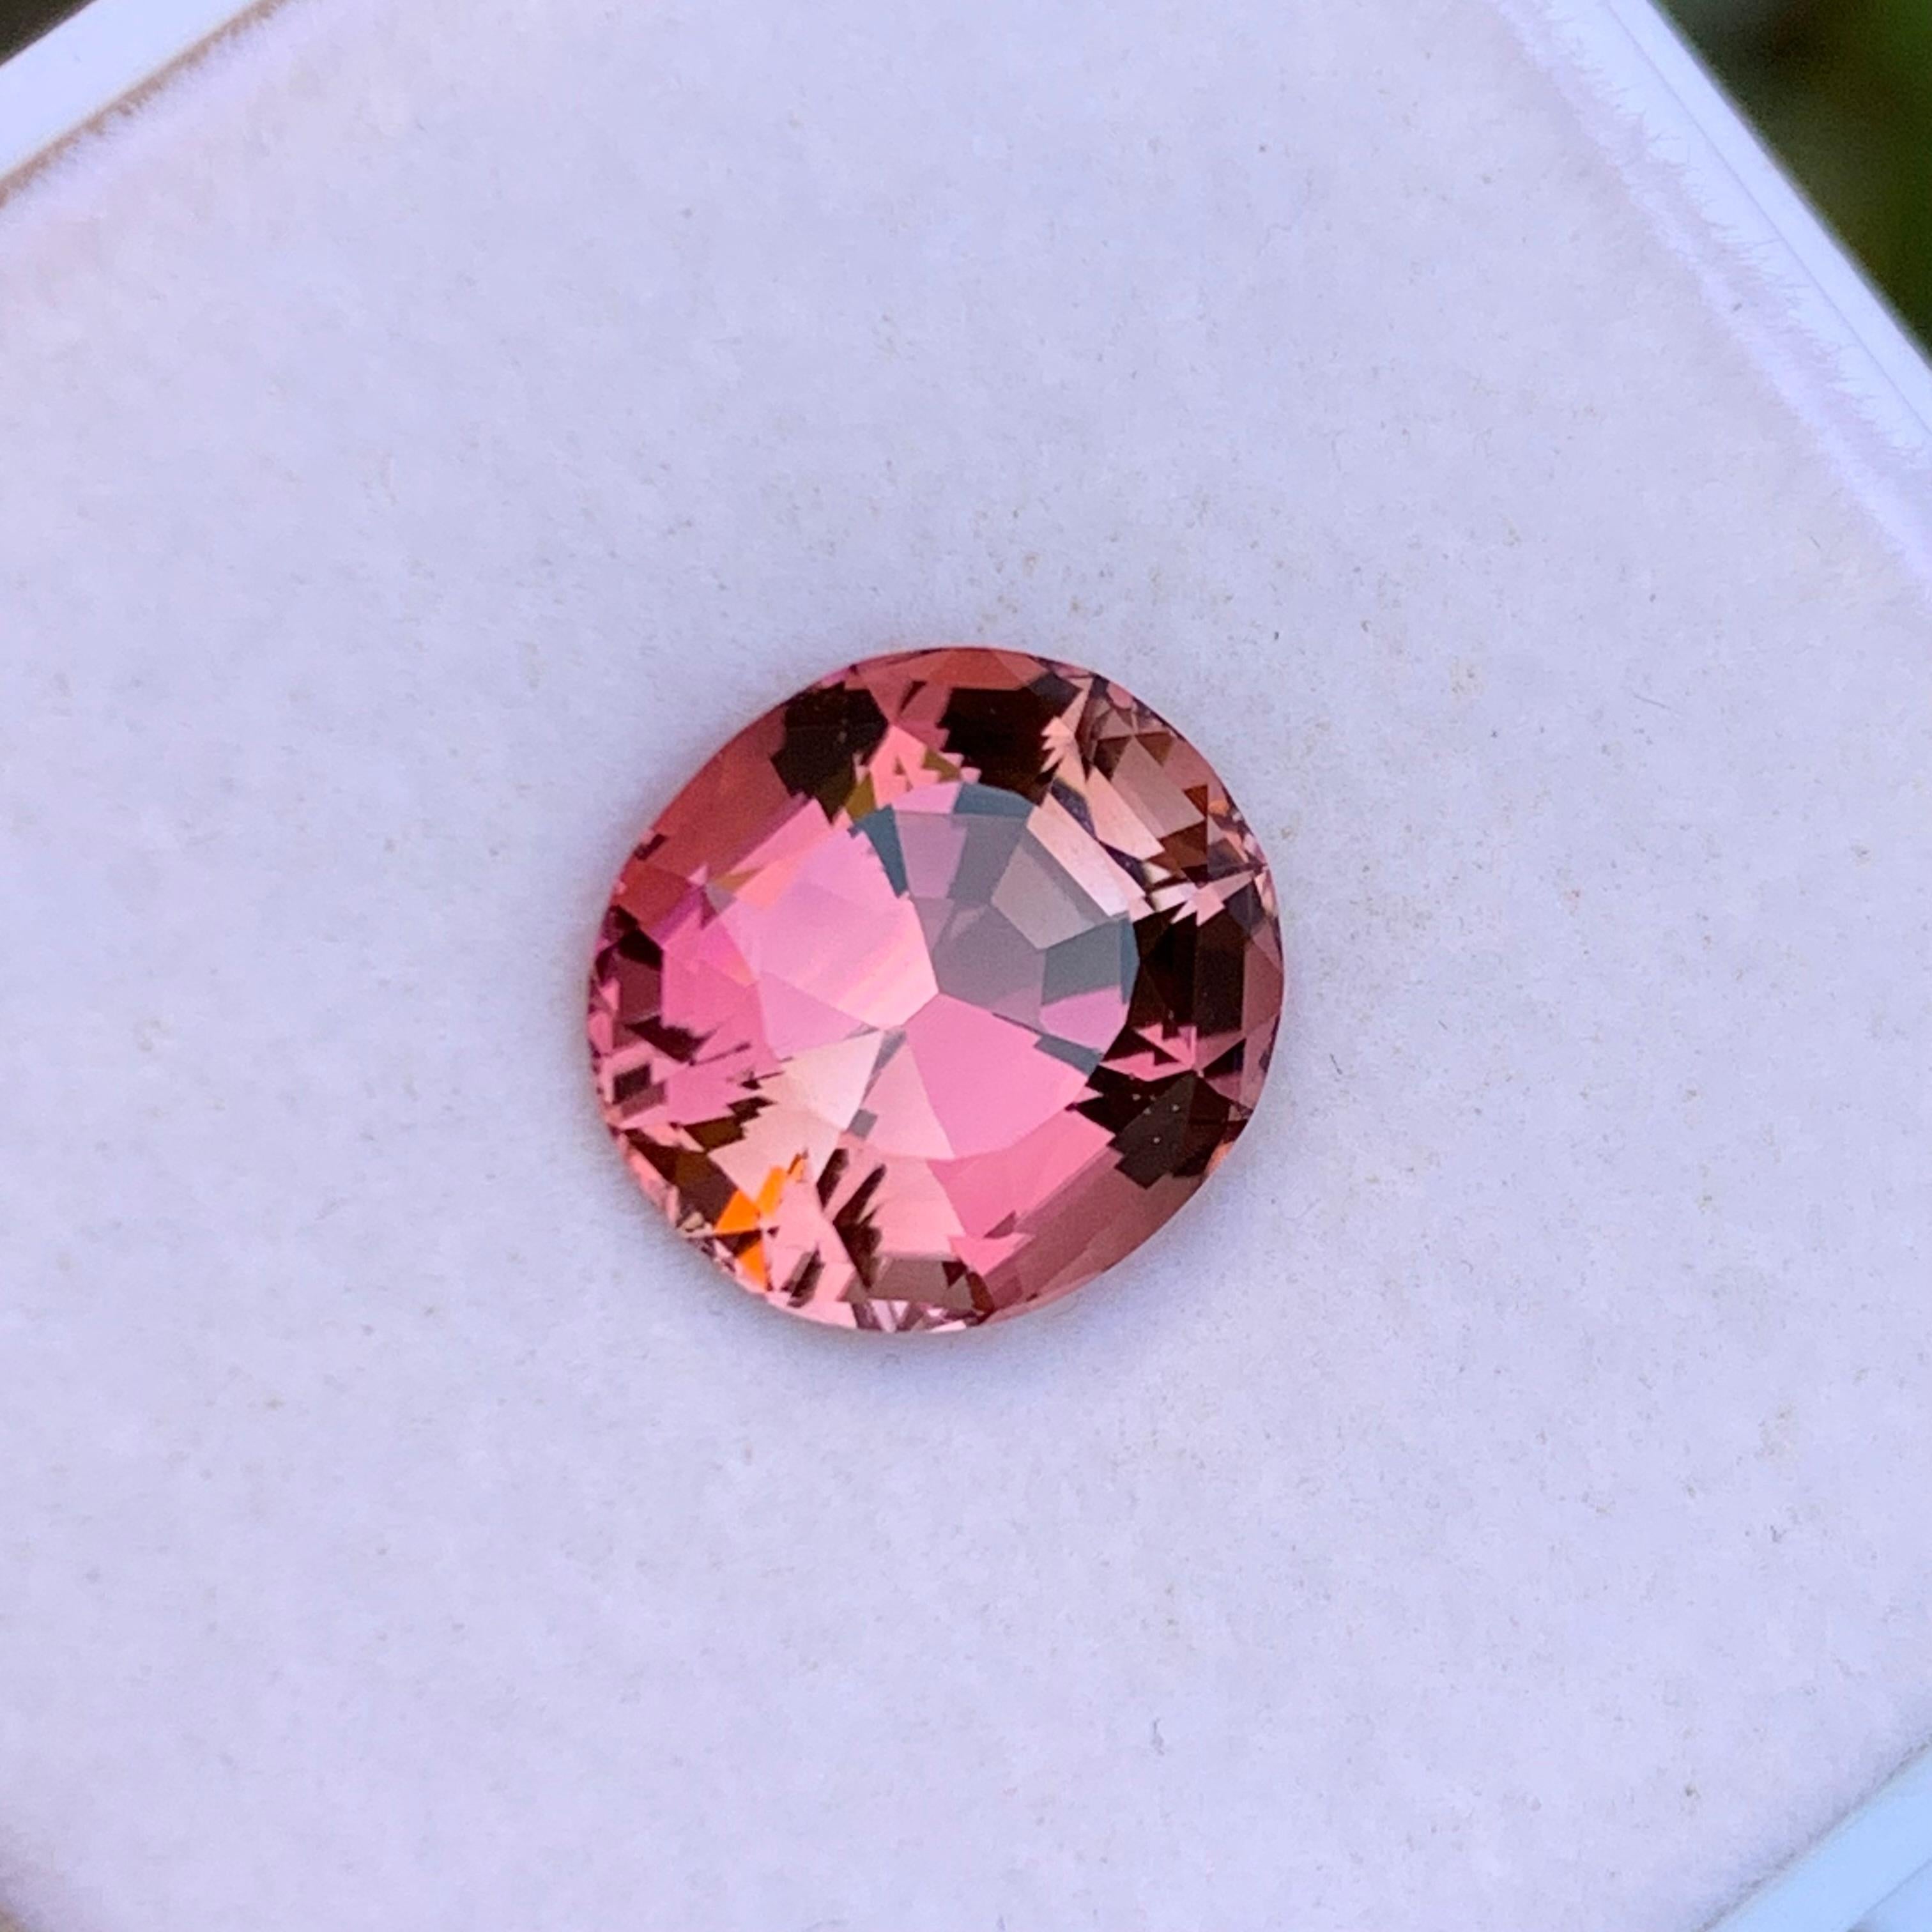 Capture the Radiance of Love with this Exquisite Pink Tourmaline!!

Gemstone Type: Tourmaline
Weight: 3.80 Carats
Dimensions: 10.18 x 9.24 x 6.55 mm
Color: Peachy Pink
Clarity: Eye Clean
Treatment: Heated
Origin: Afghanistan 🇦🇫 
Certificate: On